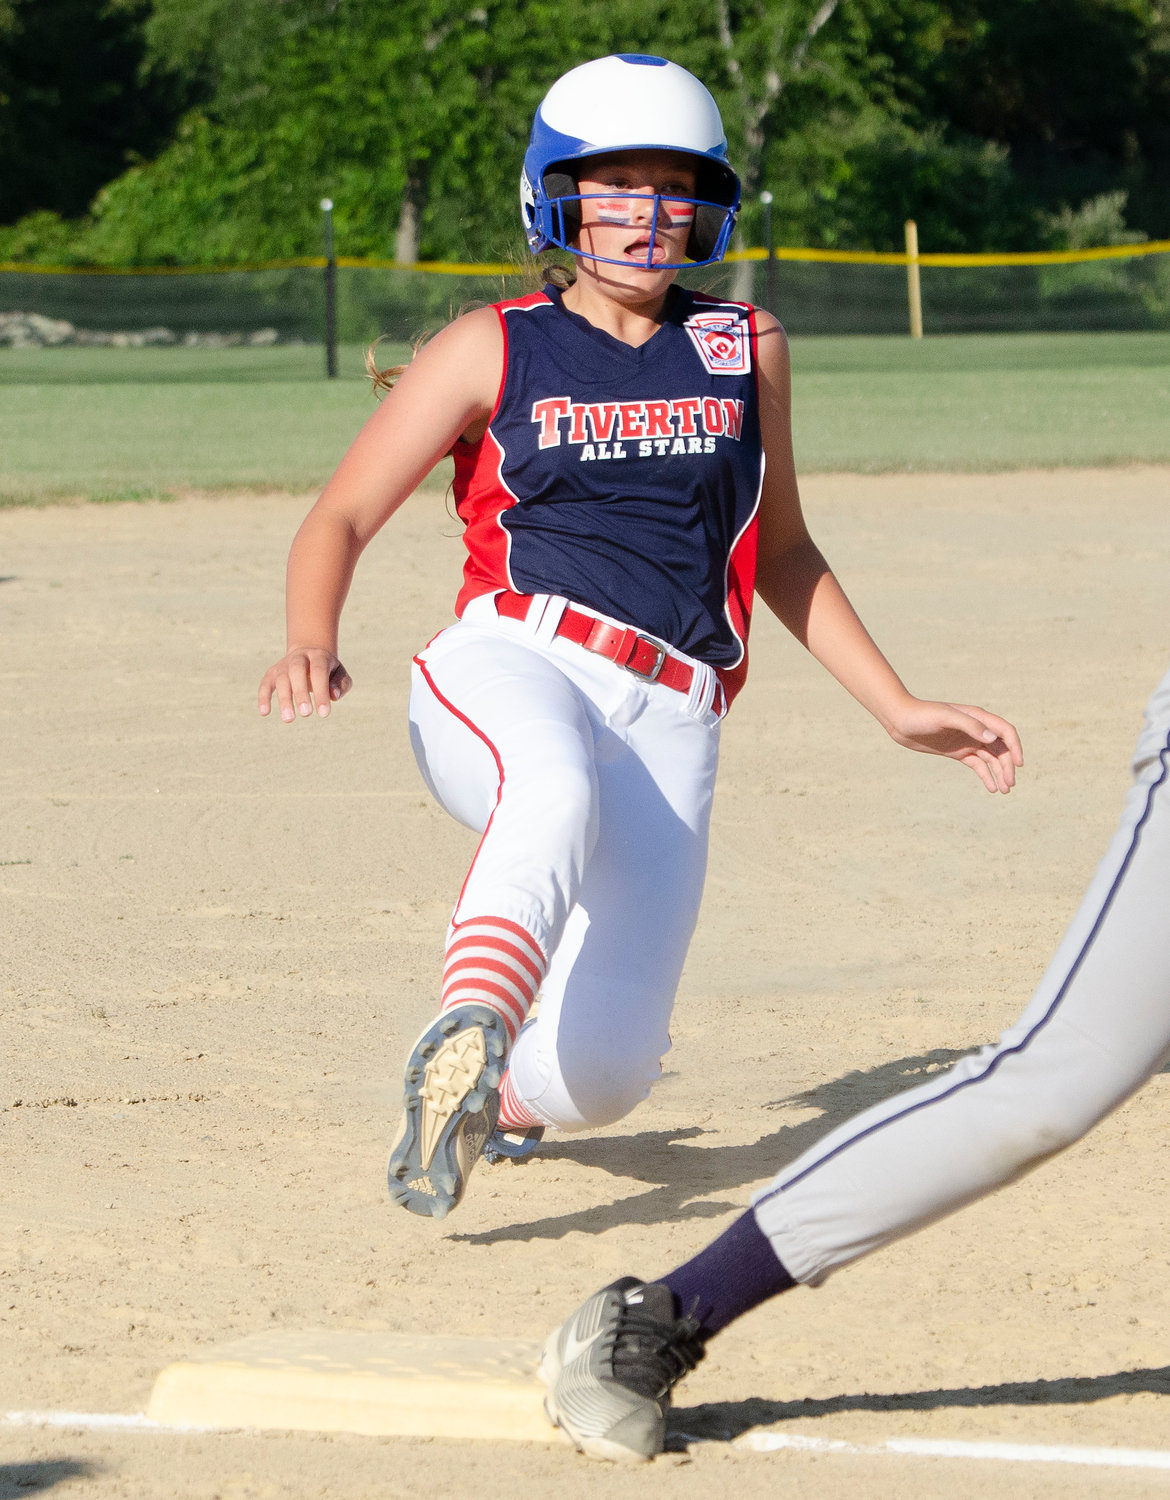 Leadoff hitter Brooke Sowa steals third base in the first inning during the team's game against South Kingstown during the 11-12 softball state championship series at Town Farm Field on Wednesday.